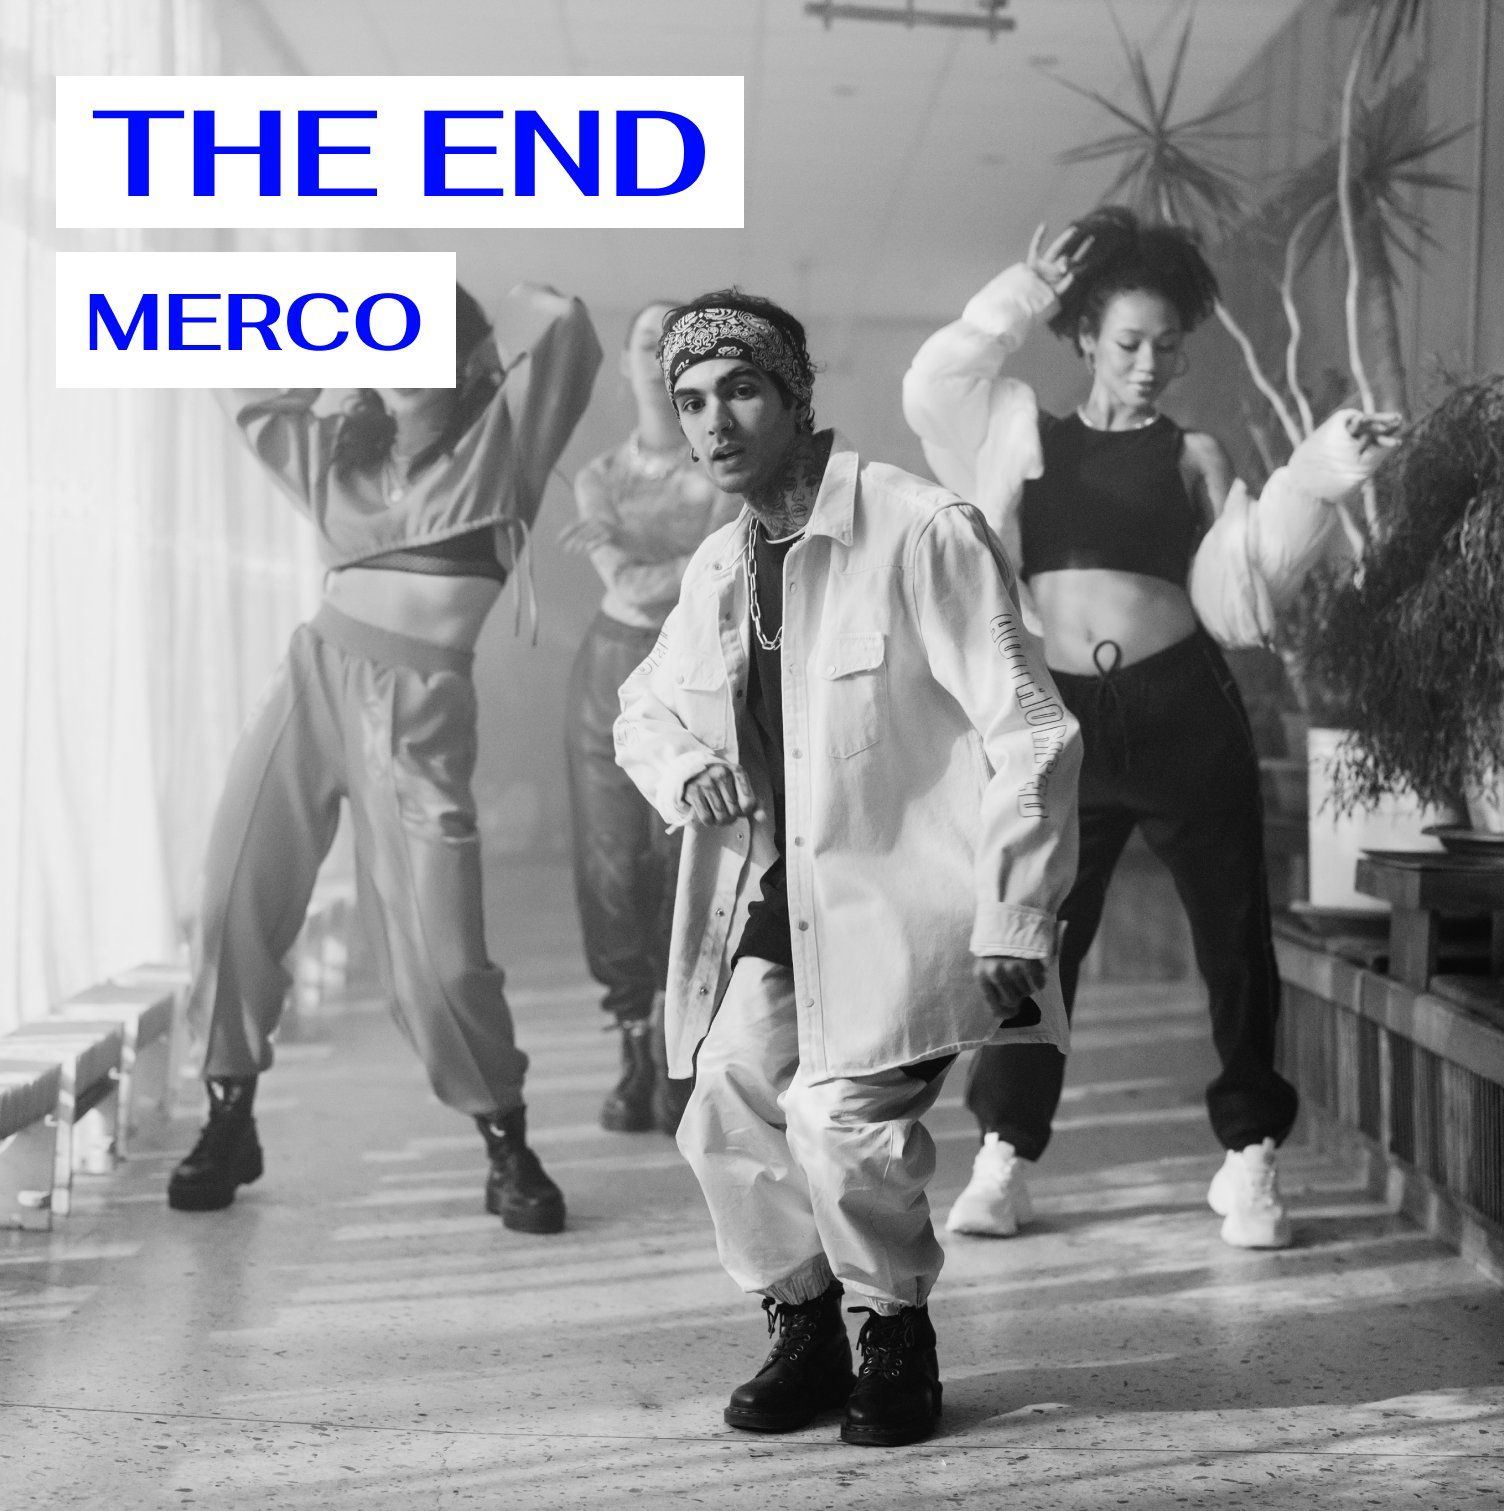 A black and white photo of a group of people dancing under the title the end merco